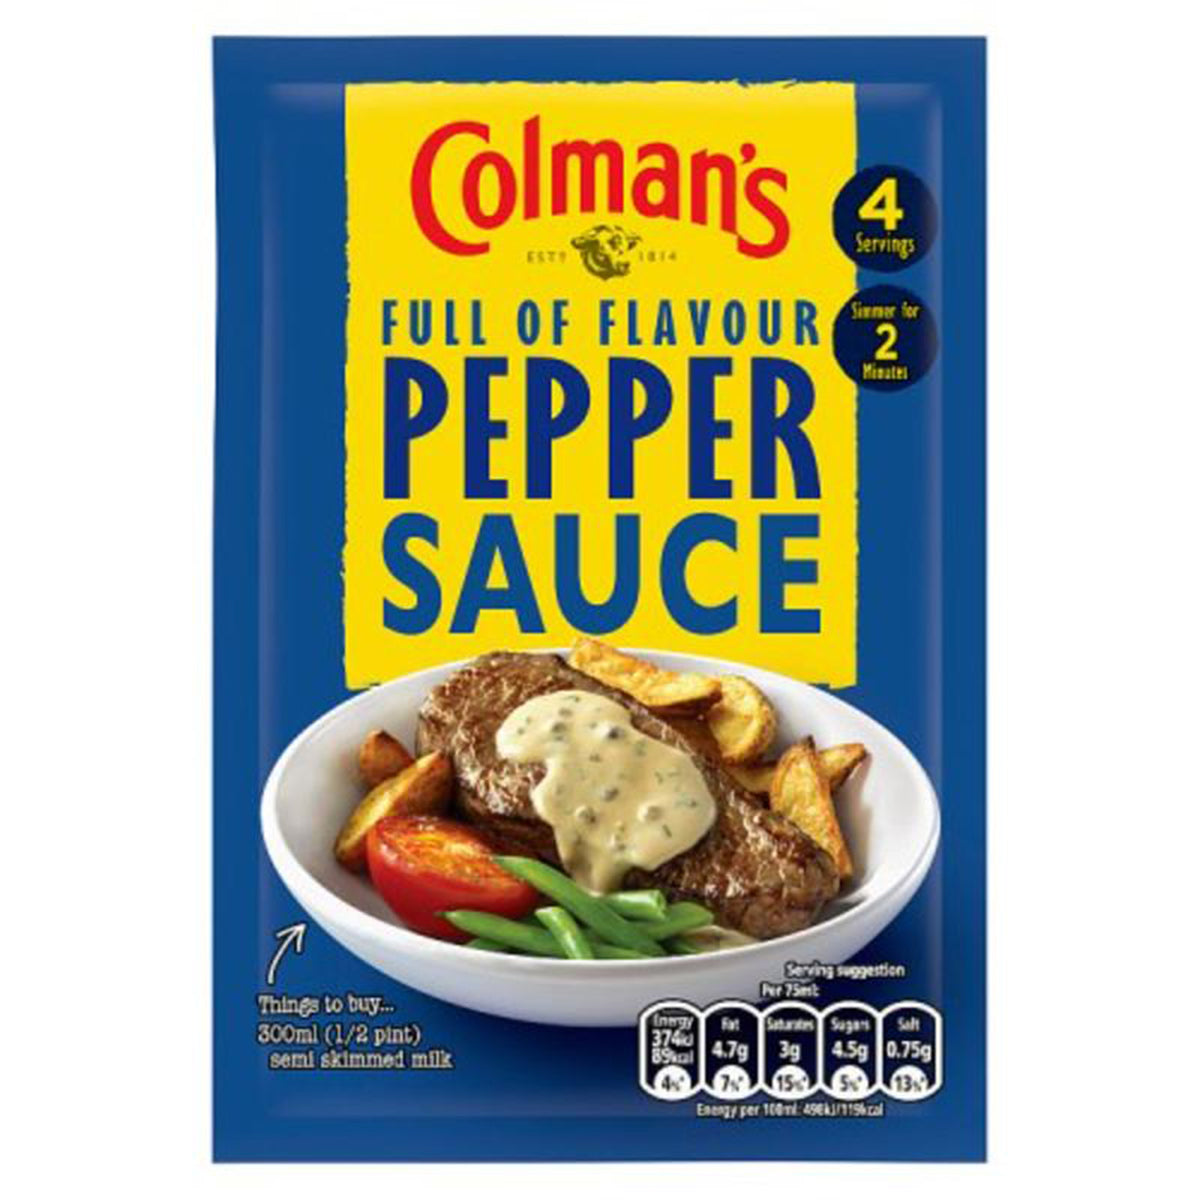 Colman's full flavour pepper sauce becomes Colmans - Pepper Sauce - 40g by the brand name Colmans.